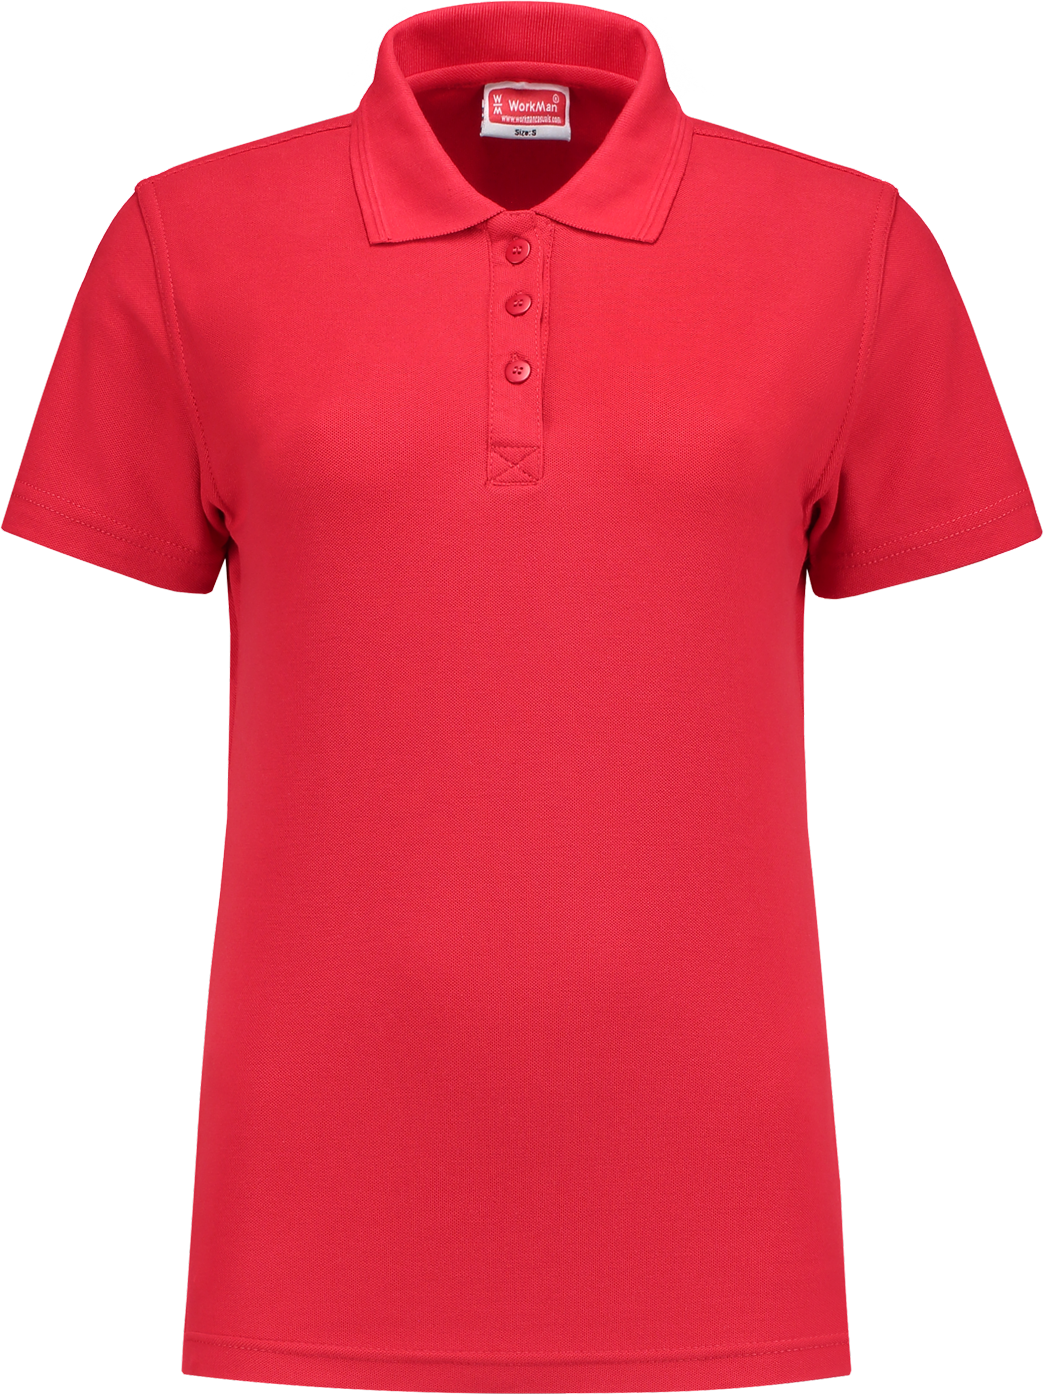 10.6.8103.16 81031 Poloshirt Outfitters Ladies Rood 3XL